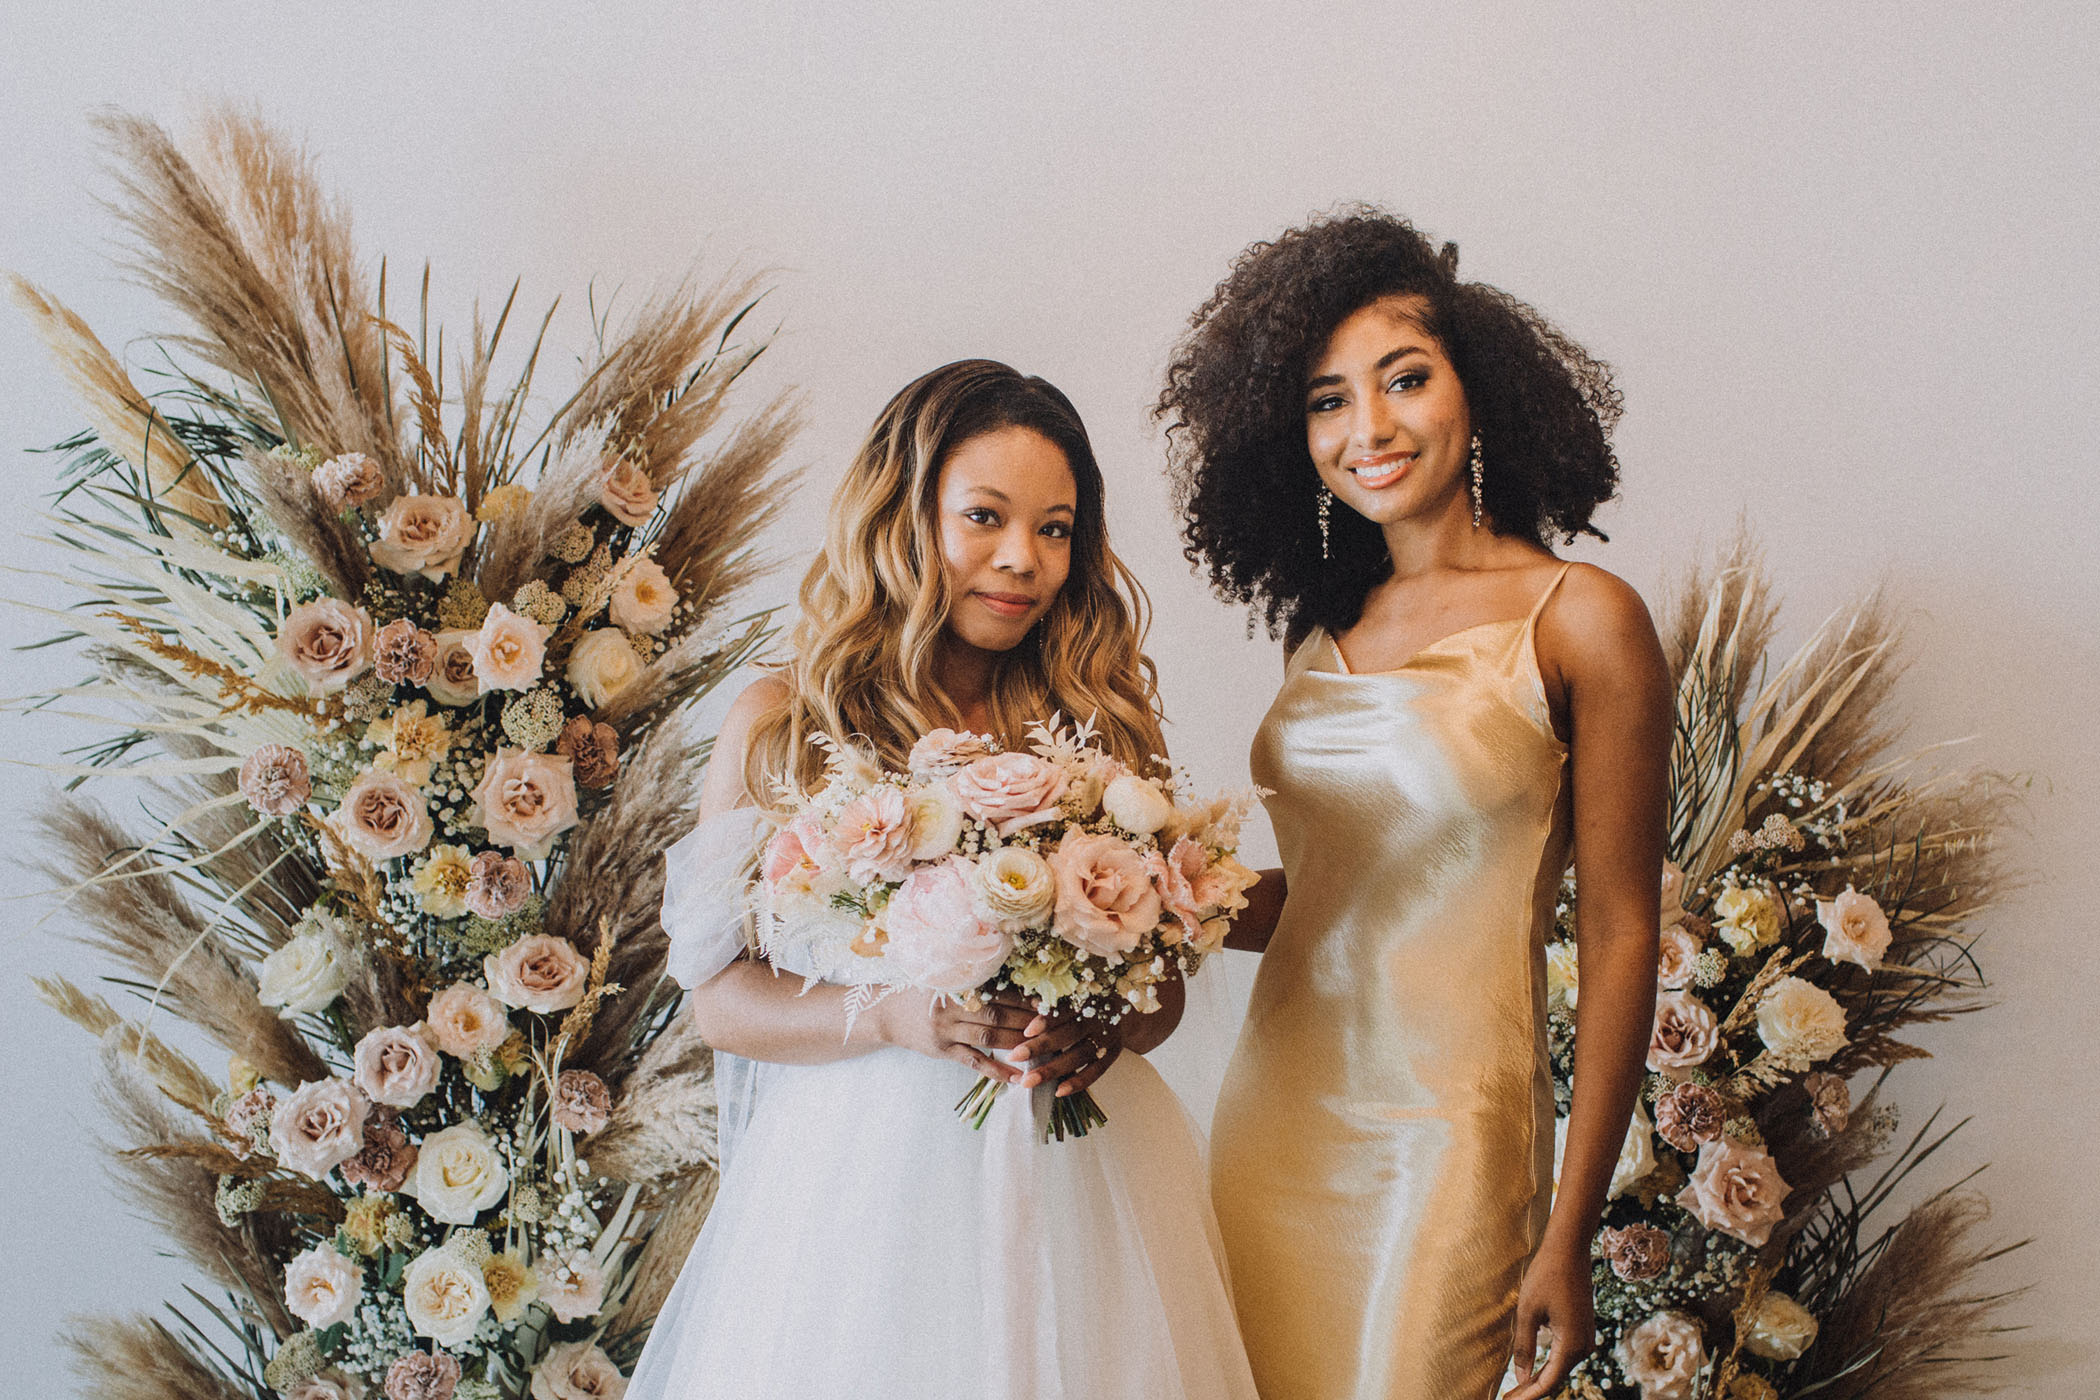 Bride posing next to her friend in a gold dress